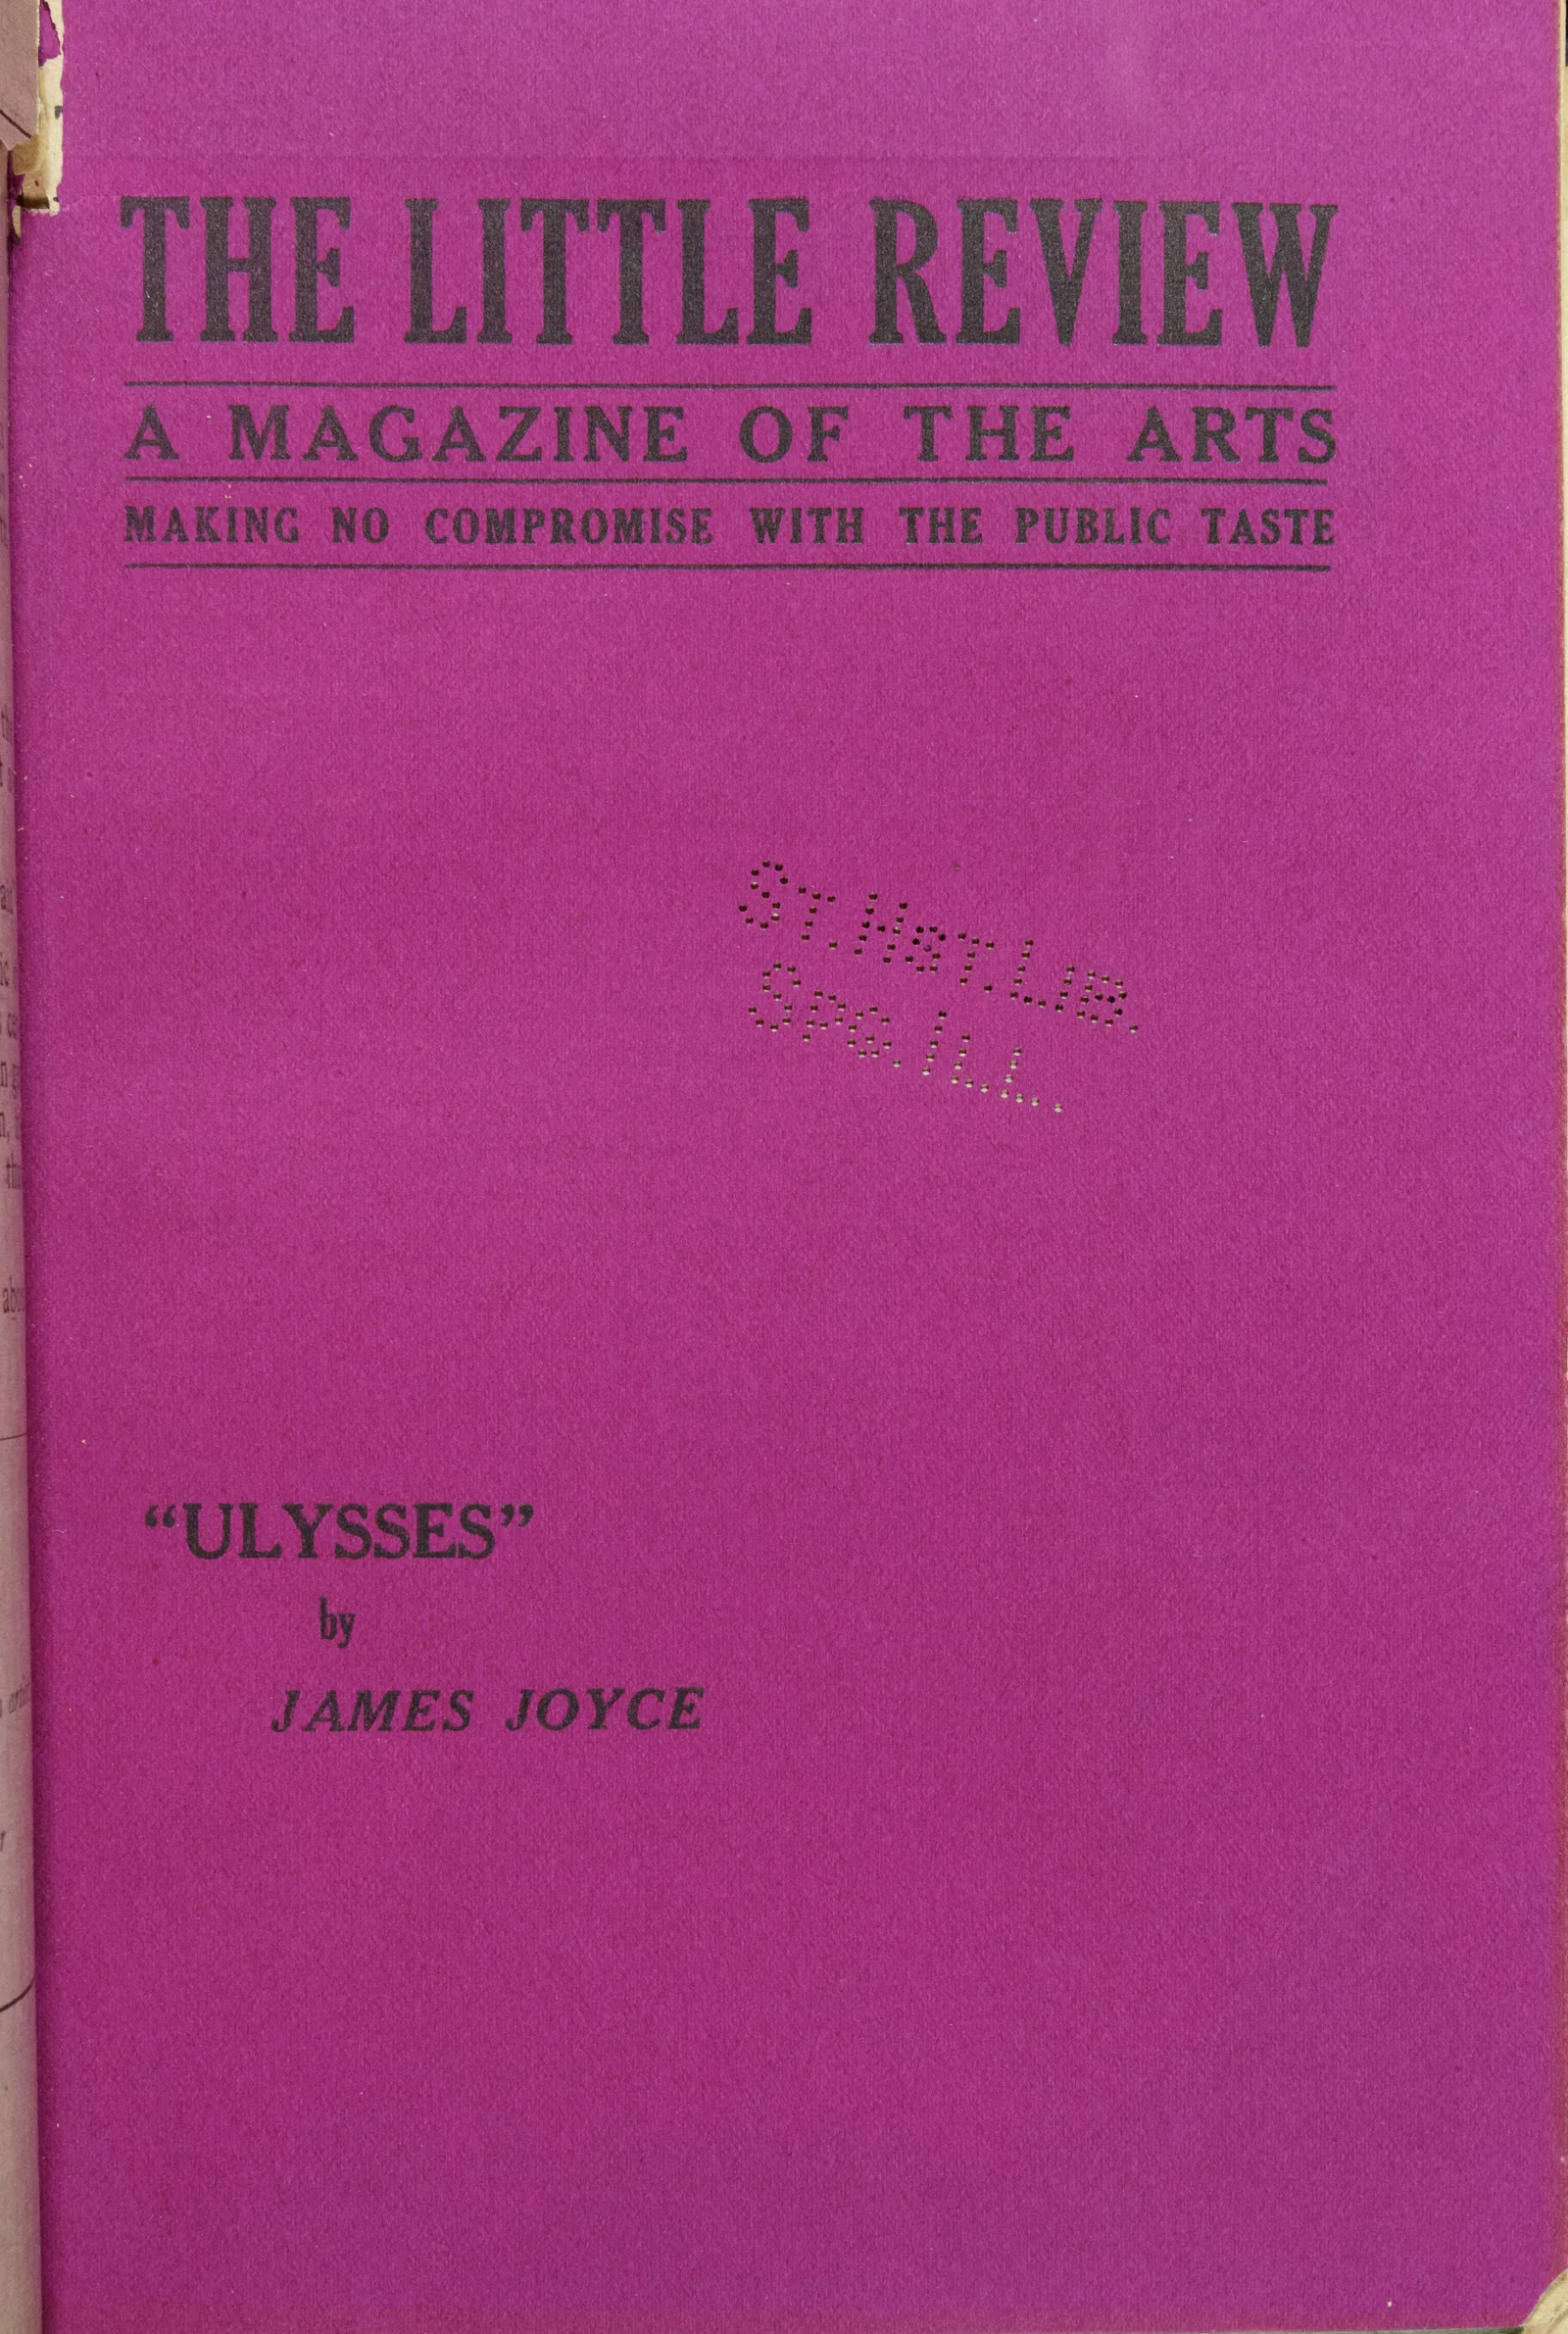 Cover of the March 1918 issue of the Little Review, featuring the first chapter of Ulysses.